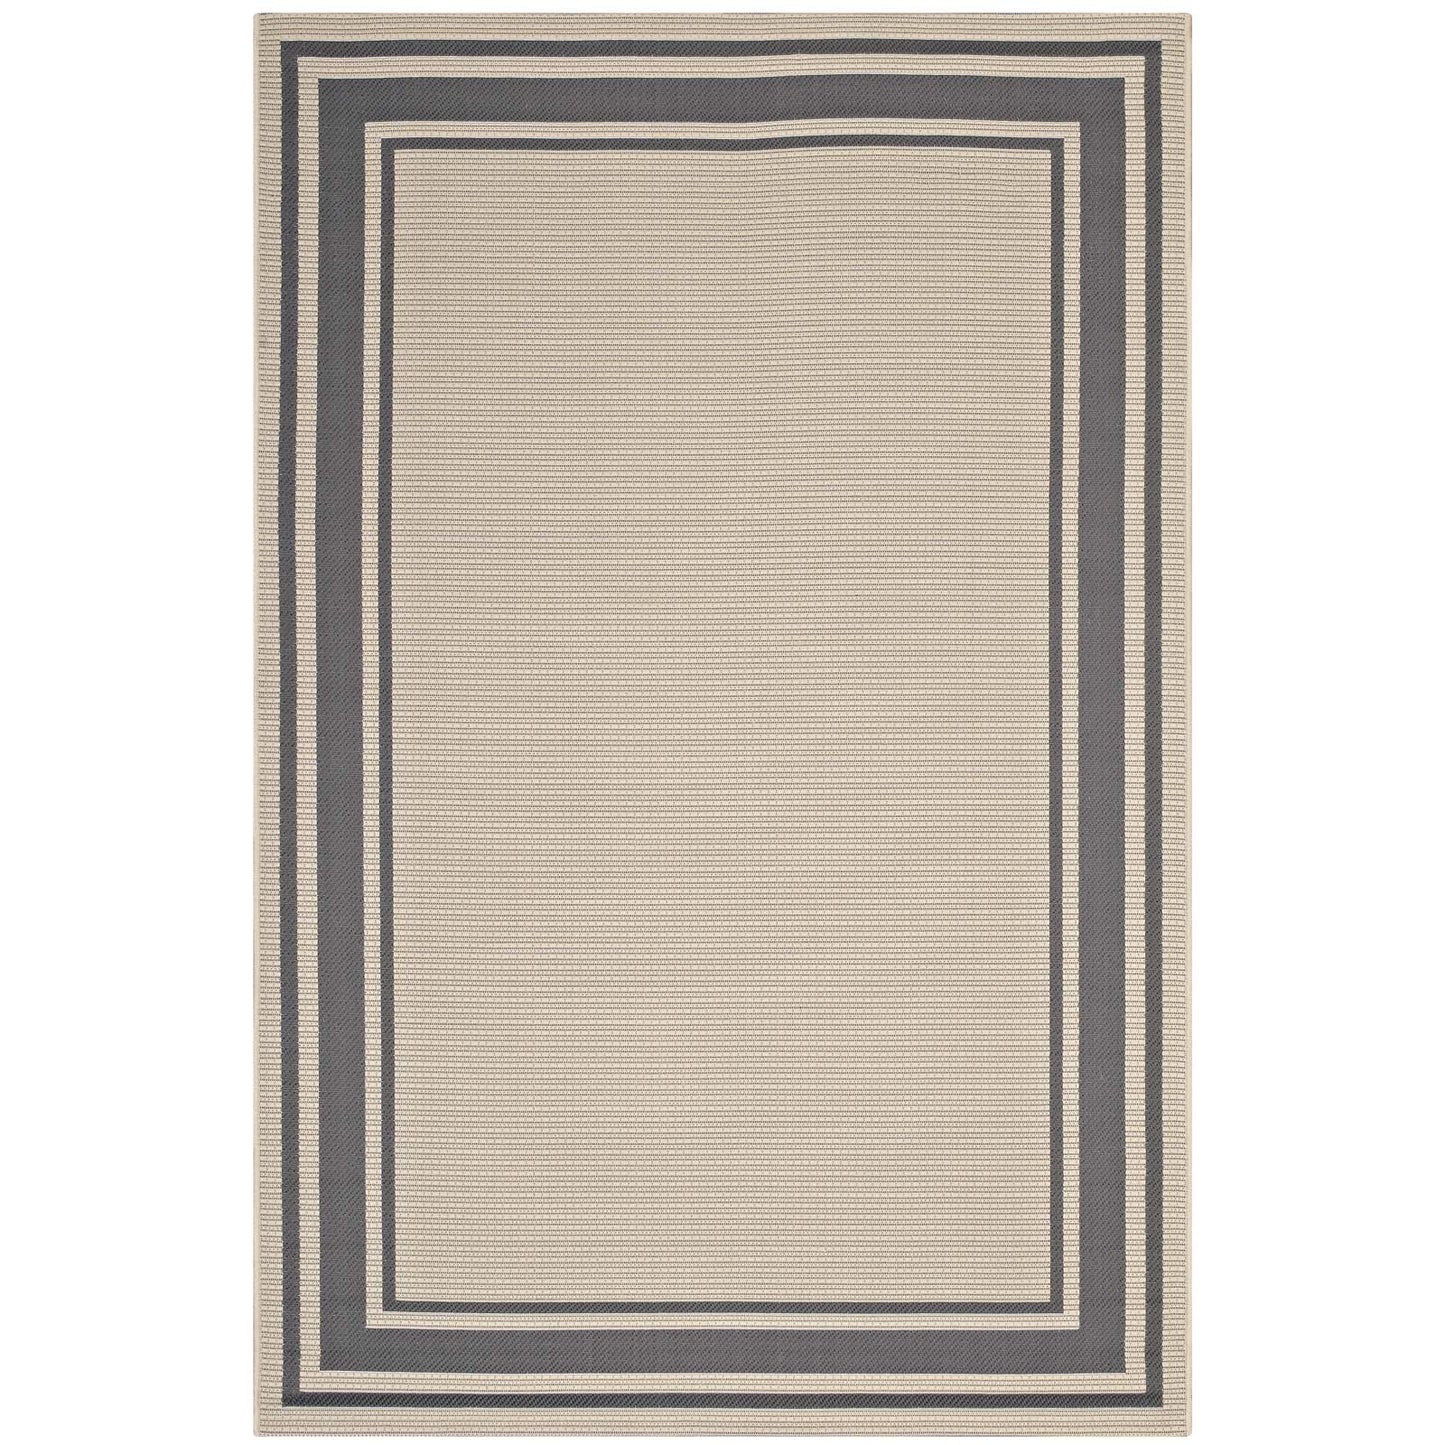 Rim Solid Border 8x10 Indoor and Outdoor Area Rug Gray and Beige R-1140D-810